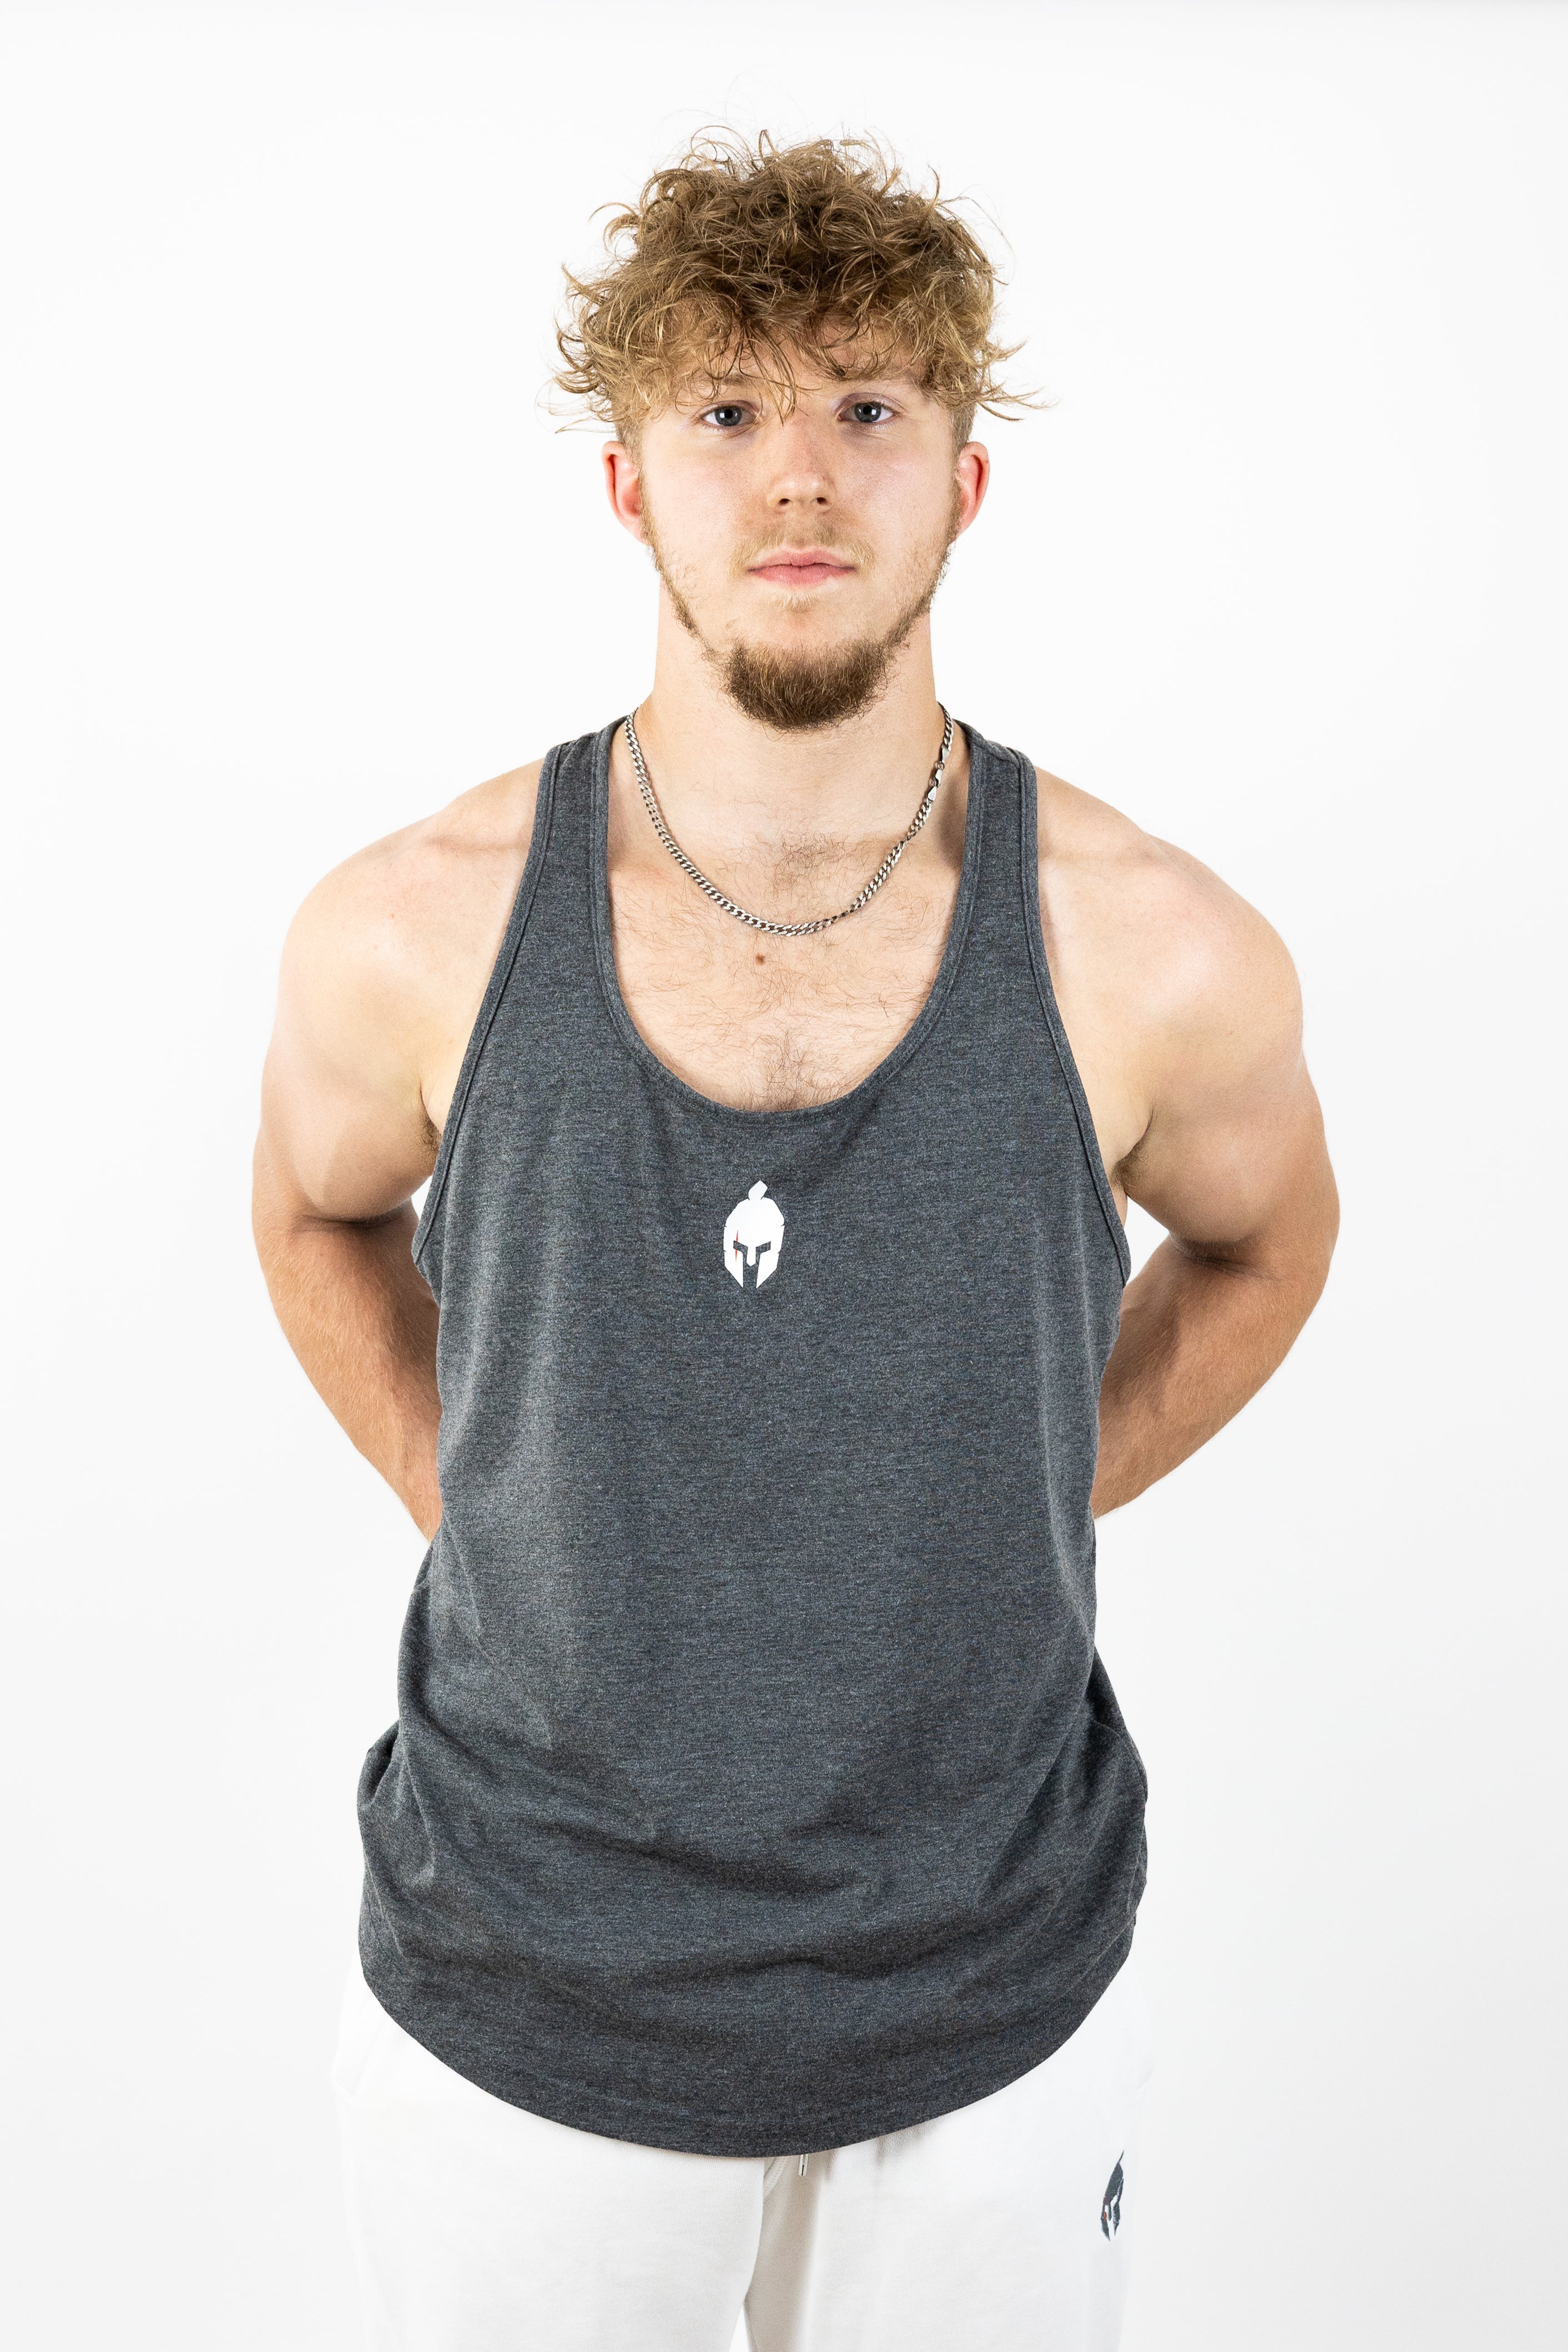 Man wearing gray stringer and silver chain with hands behind back